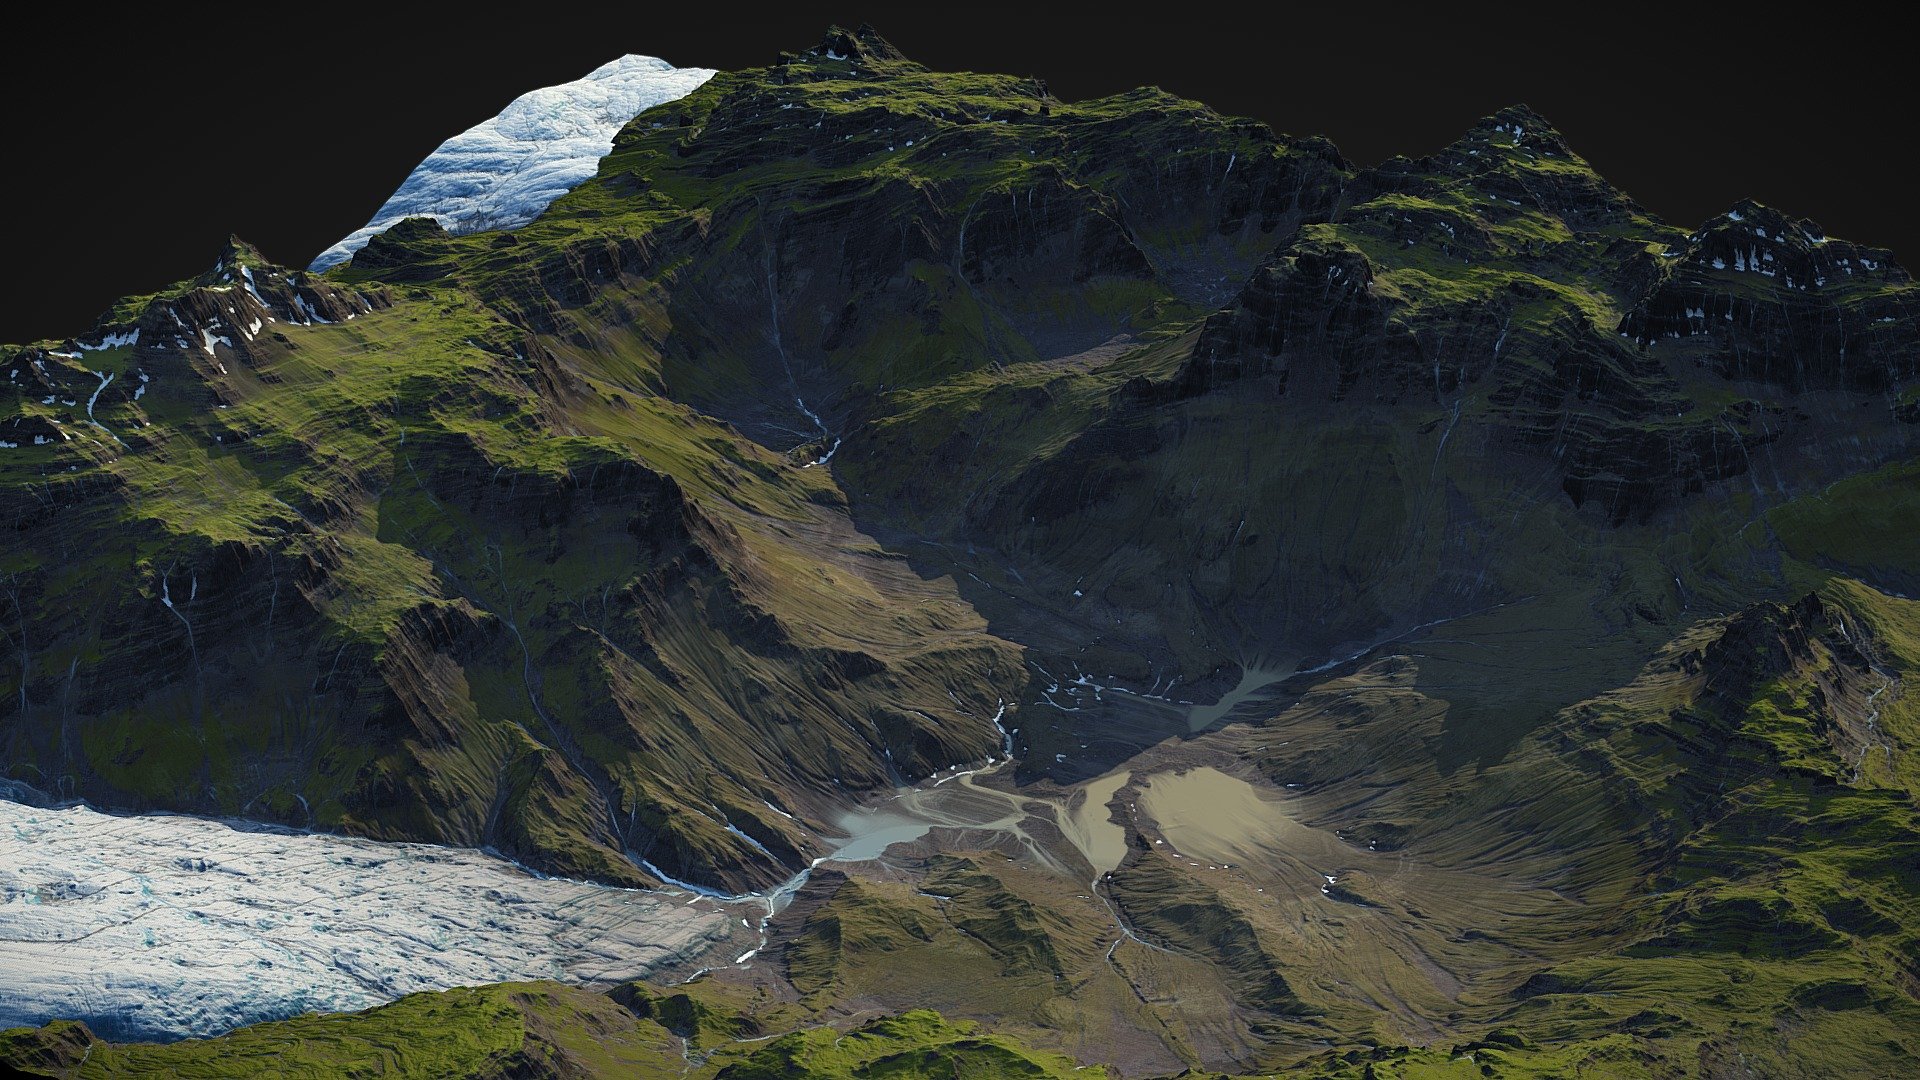 Fully Procedural Landscape created in World Machine.

included 4k textures - COLOR  NORMAL  LIGHT_1  LIGHT_2  SNOW MASK  WATER MASK

Ready for game or render!

Other assets on https://gamewarming.com/ - Iceland Mountains Landscape - Buy Royalty Free 3D model by gamewarming 3d model